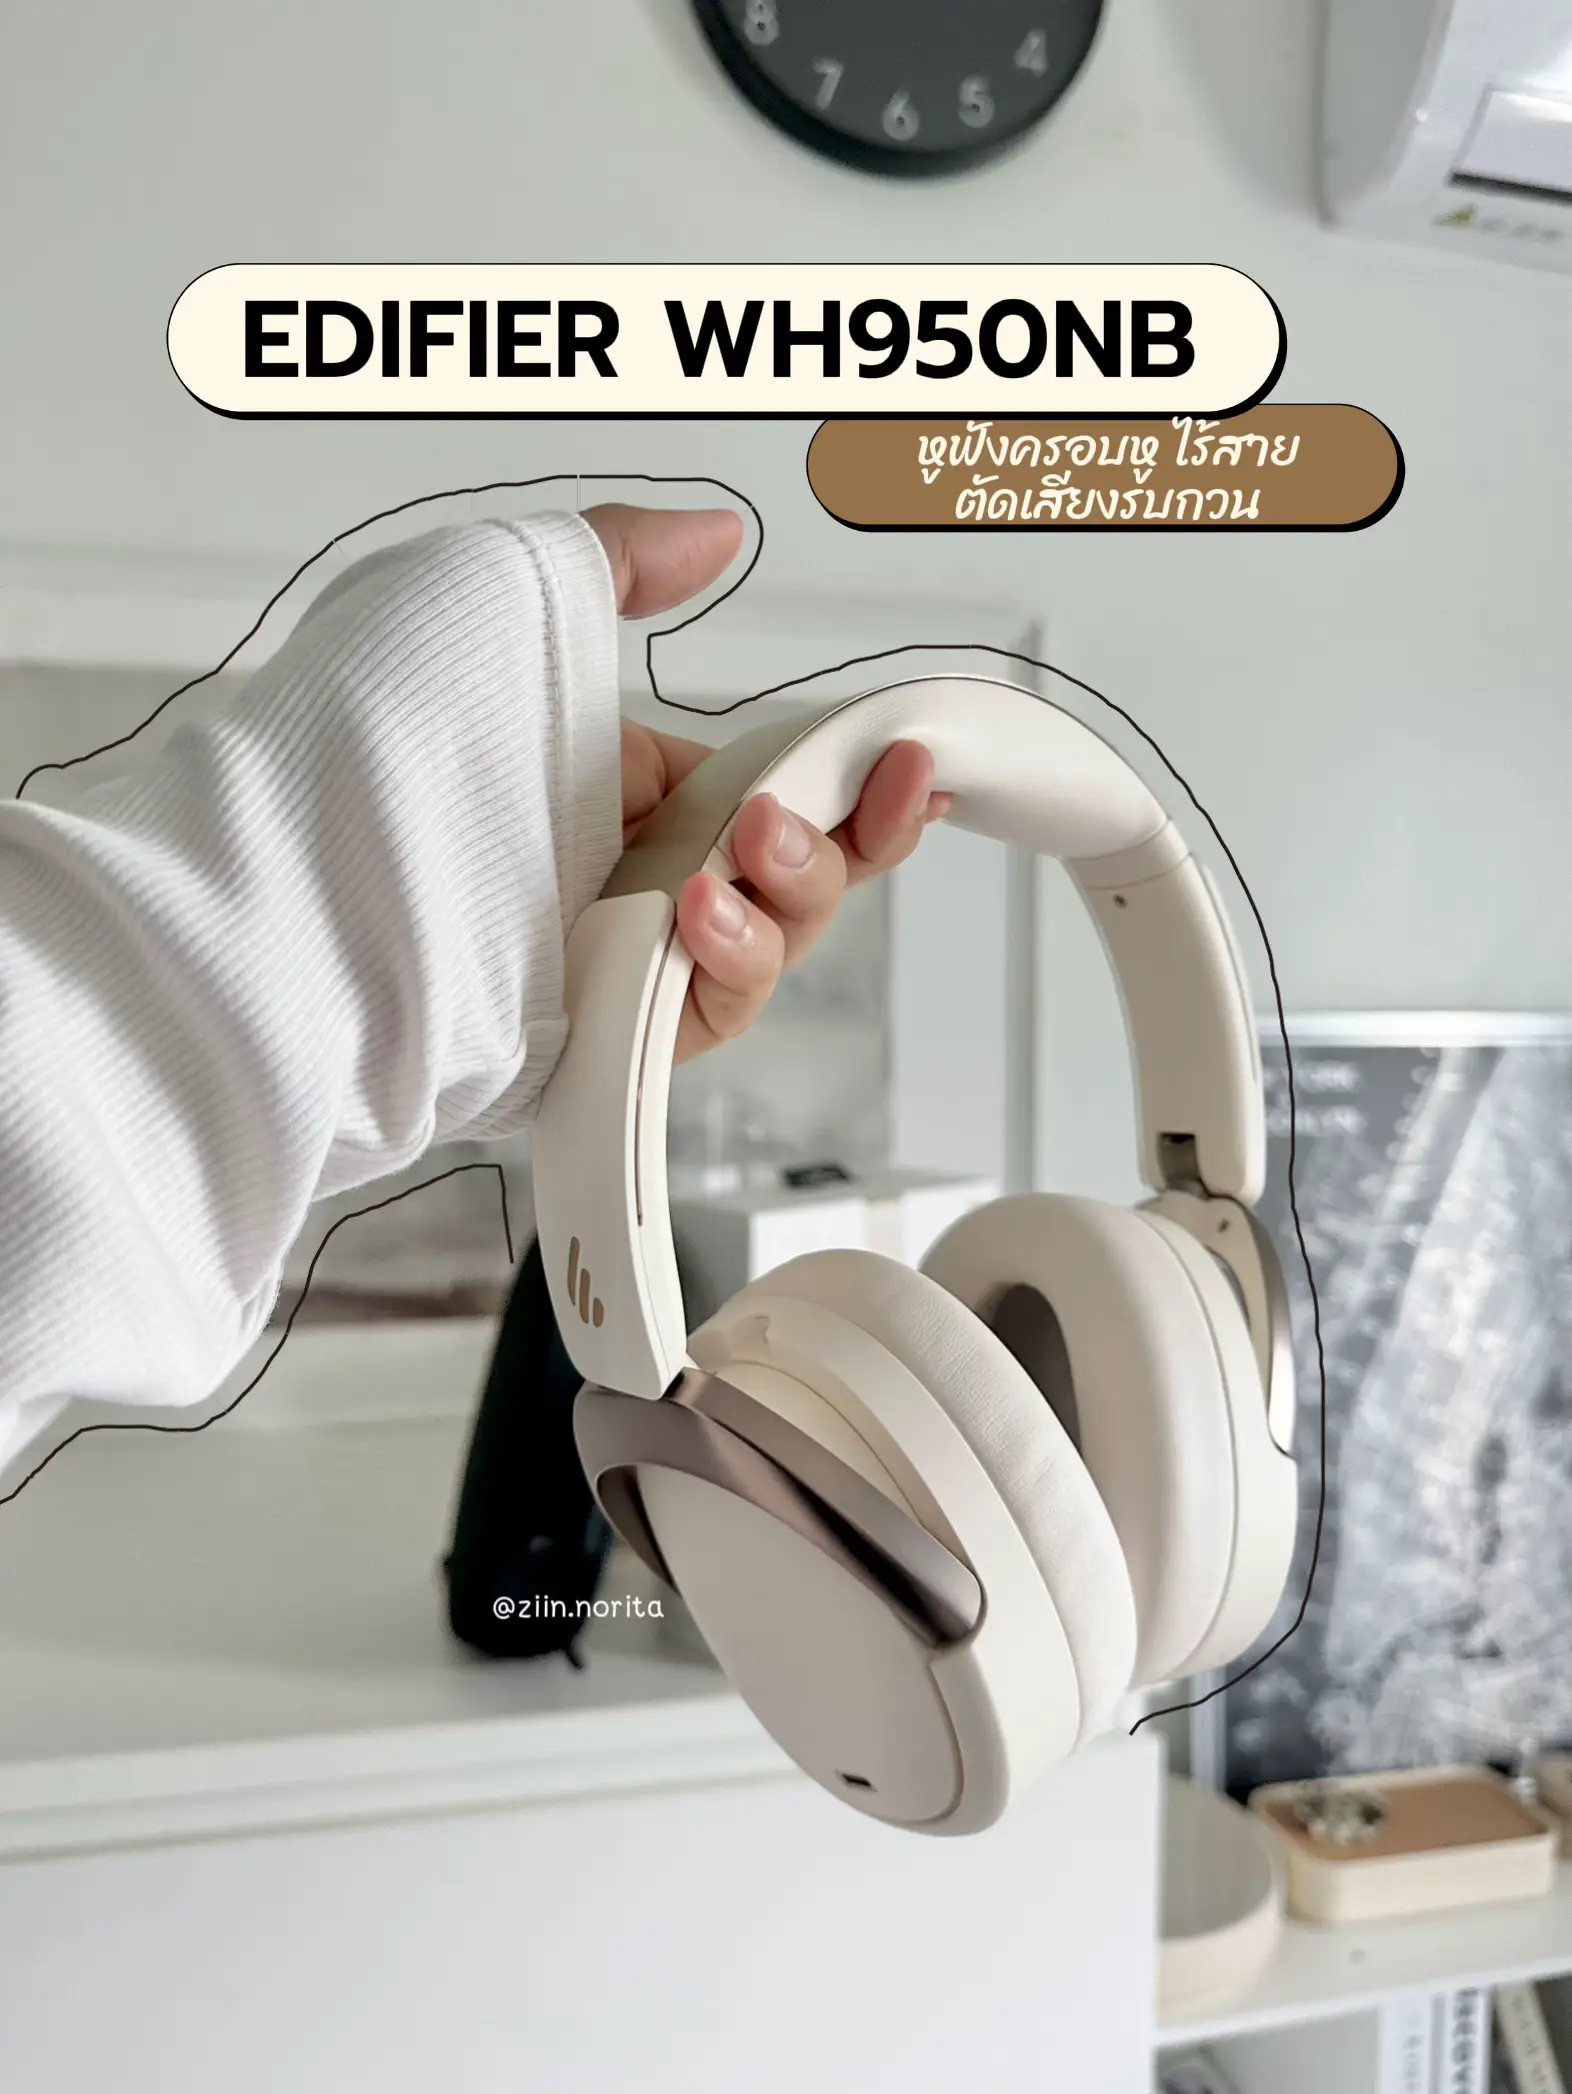 🎧EDIFIER HEADSET REVIEW WH950NB VERSION, Gallery posted by Z